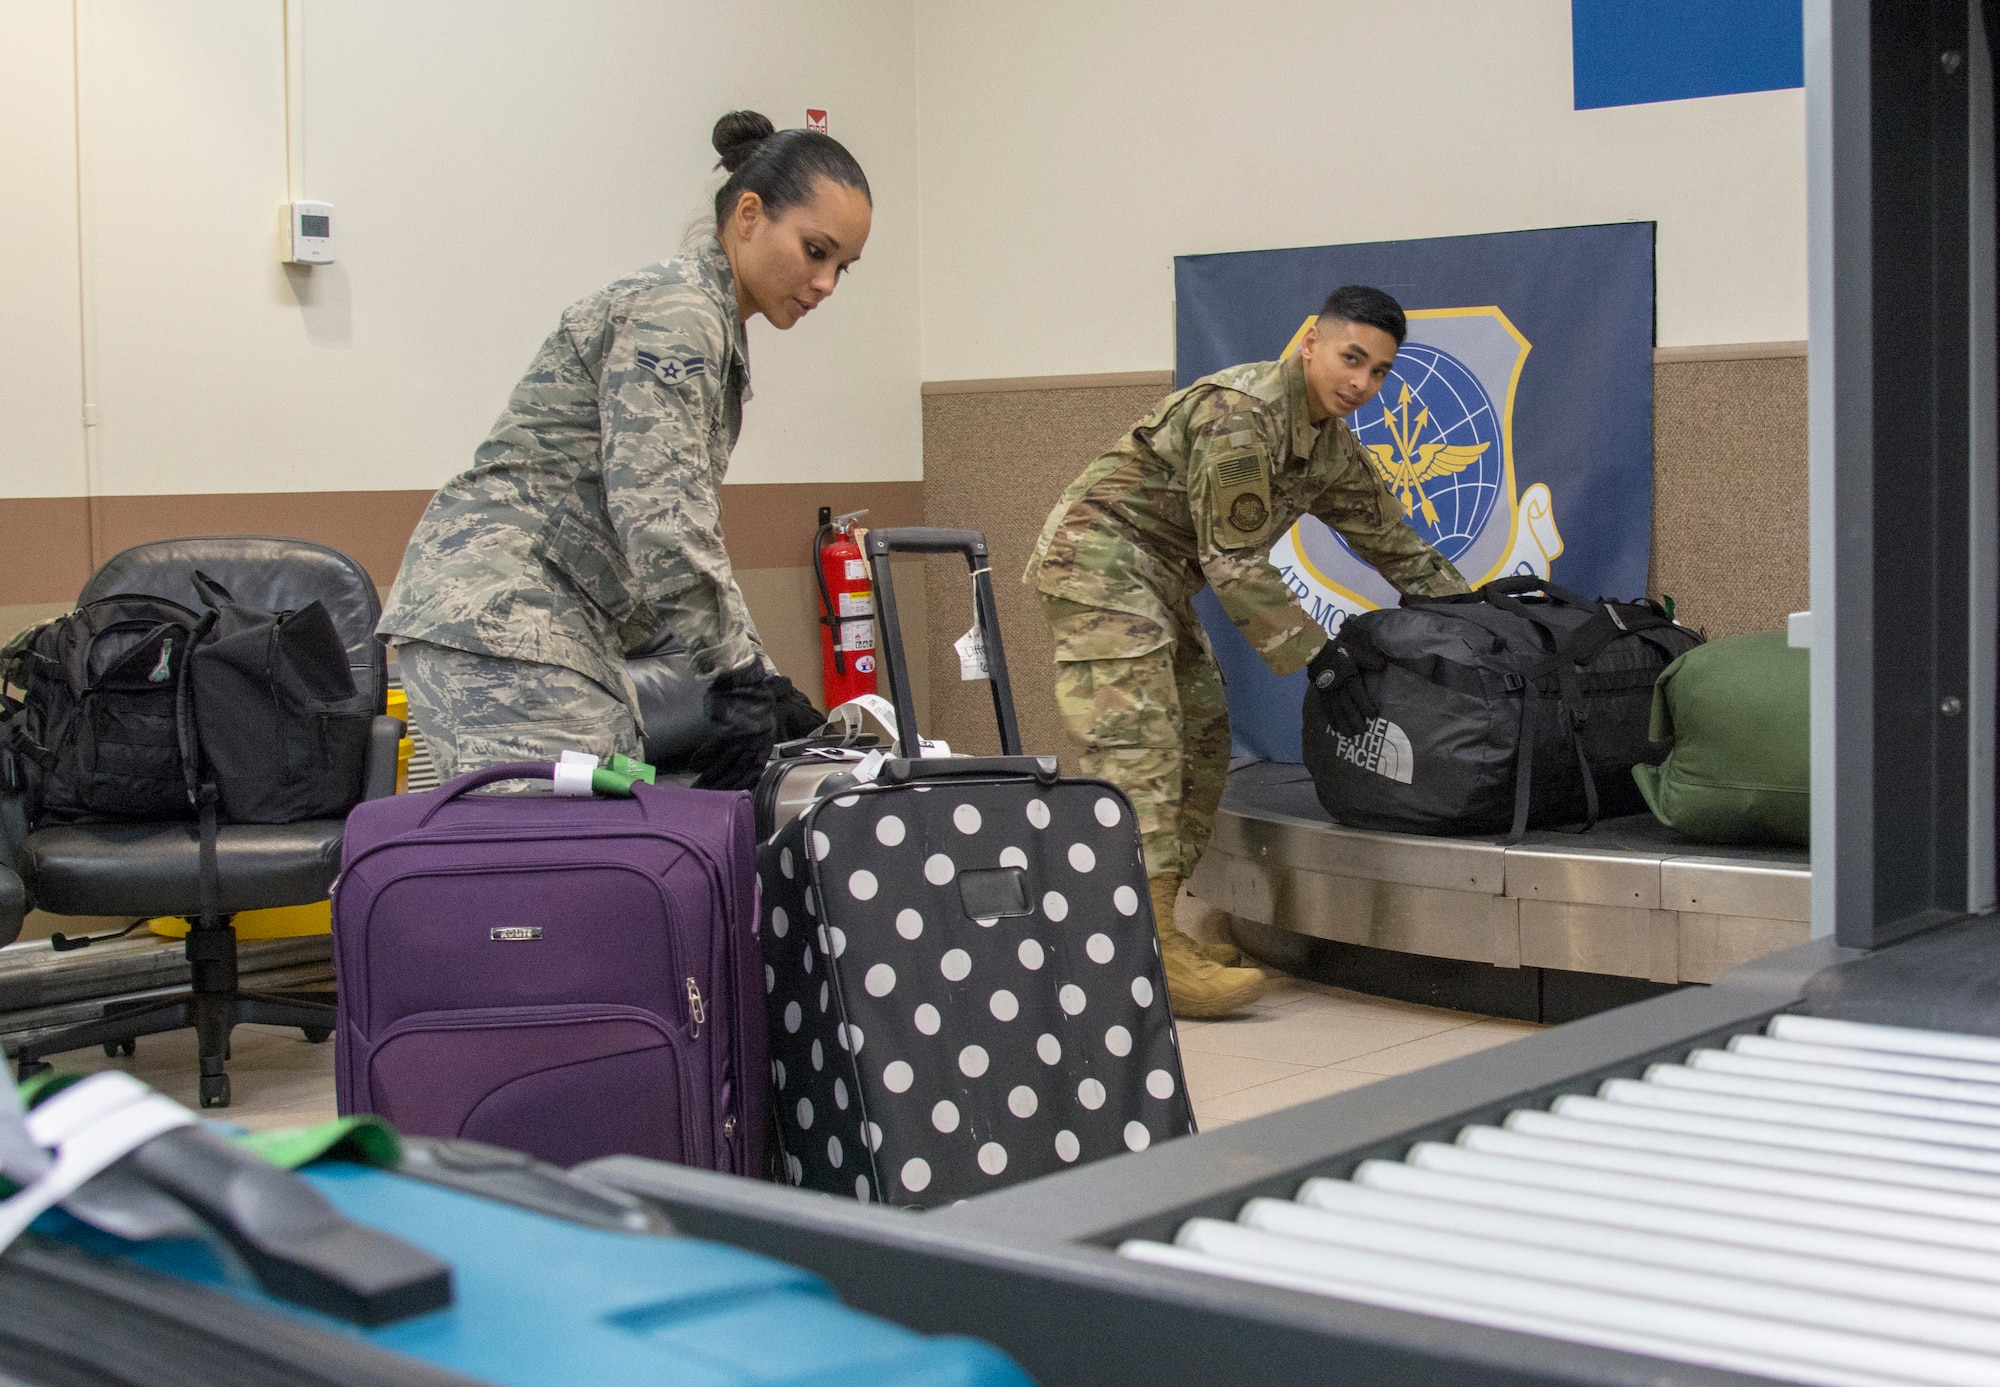 Picture of U.S. Air Force Airman 1st Class Camarin Perez, left, and Senior Airman Joshua San Agustin, 44th Aerial Port Squadron transportation specialists, moving baggage to a conveyor belt for loading onto an aircraft in support of the first Patriot Express mission at Andersen Air Force Base, Guam, March 7, 2020.